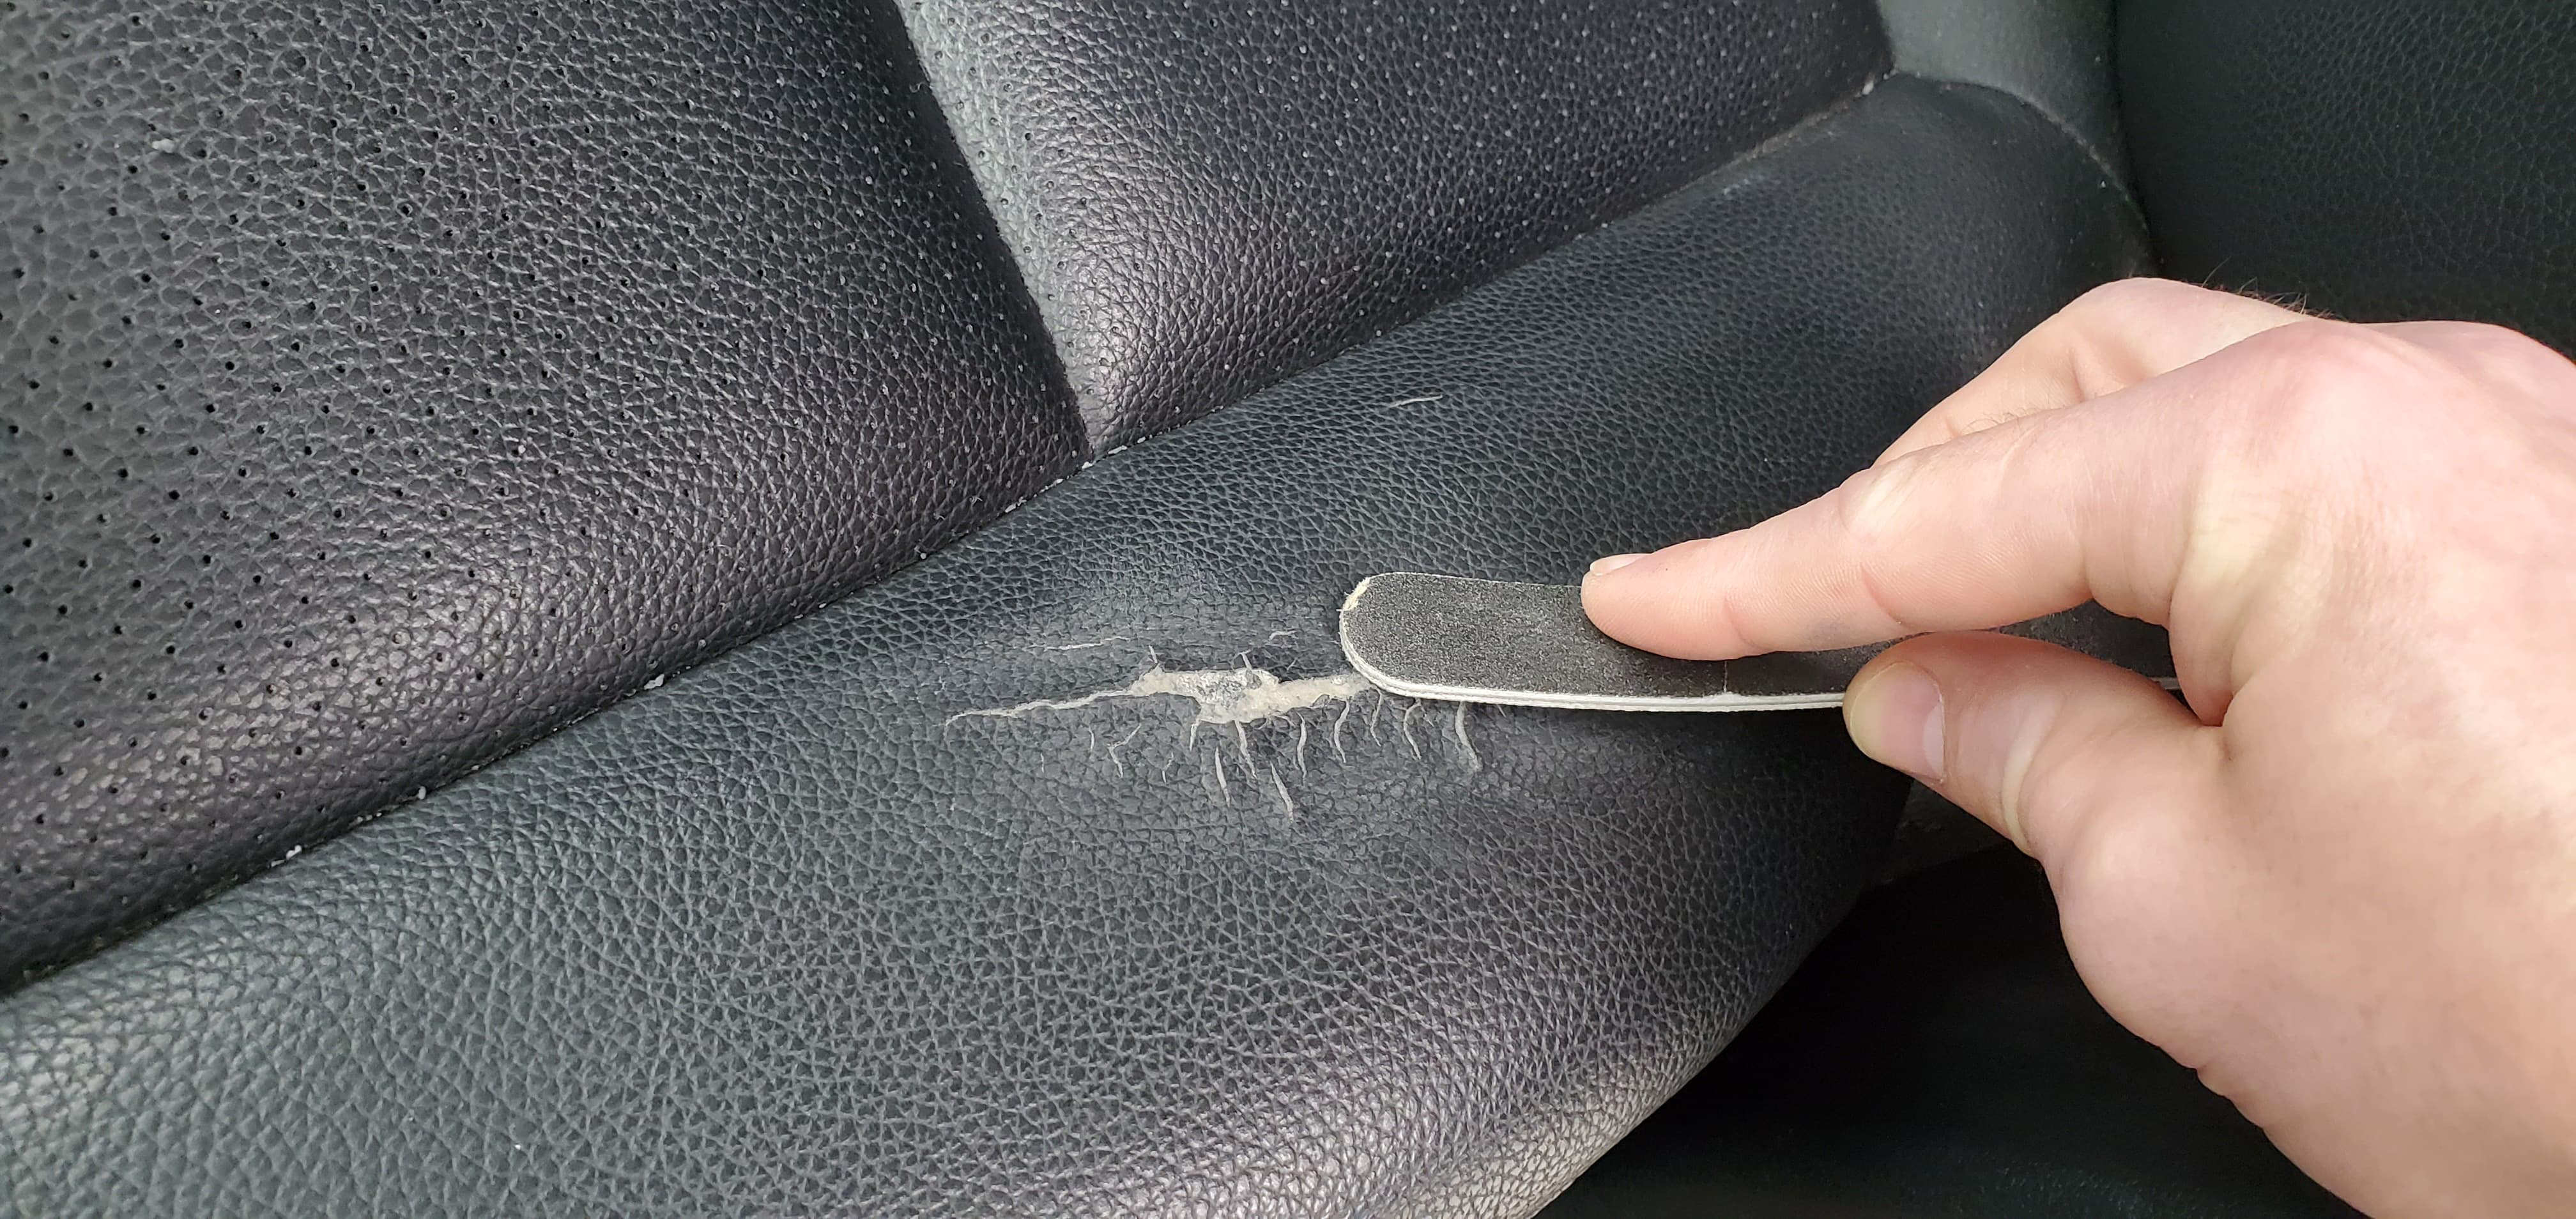 How To Fix Broken Leather How To Repair A Leather Car Seat